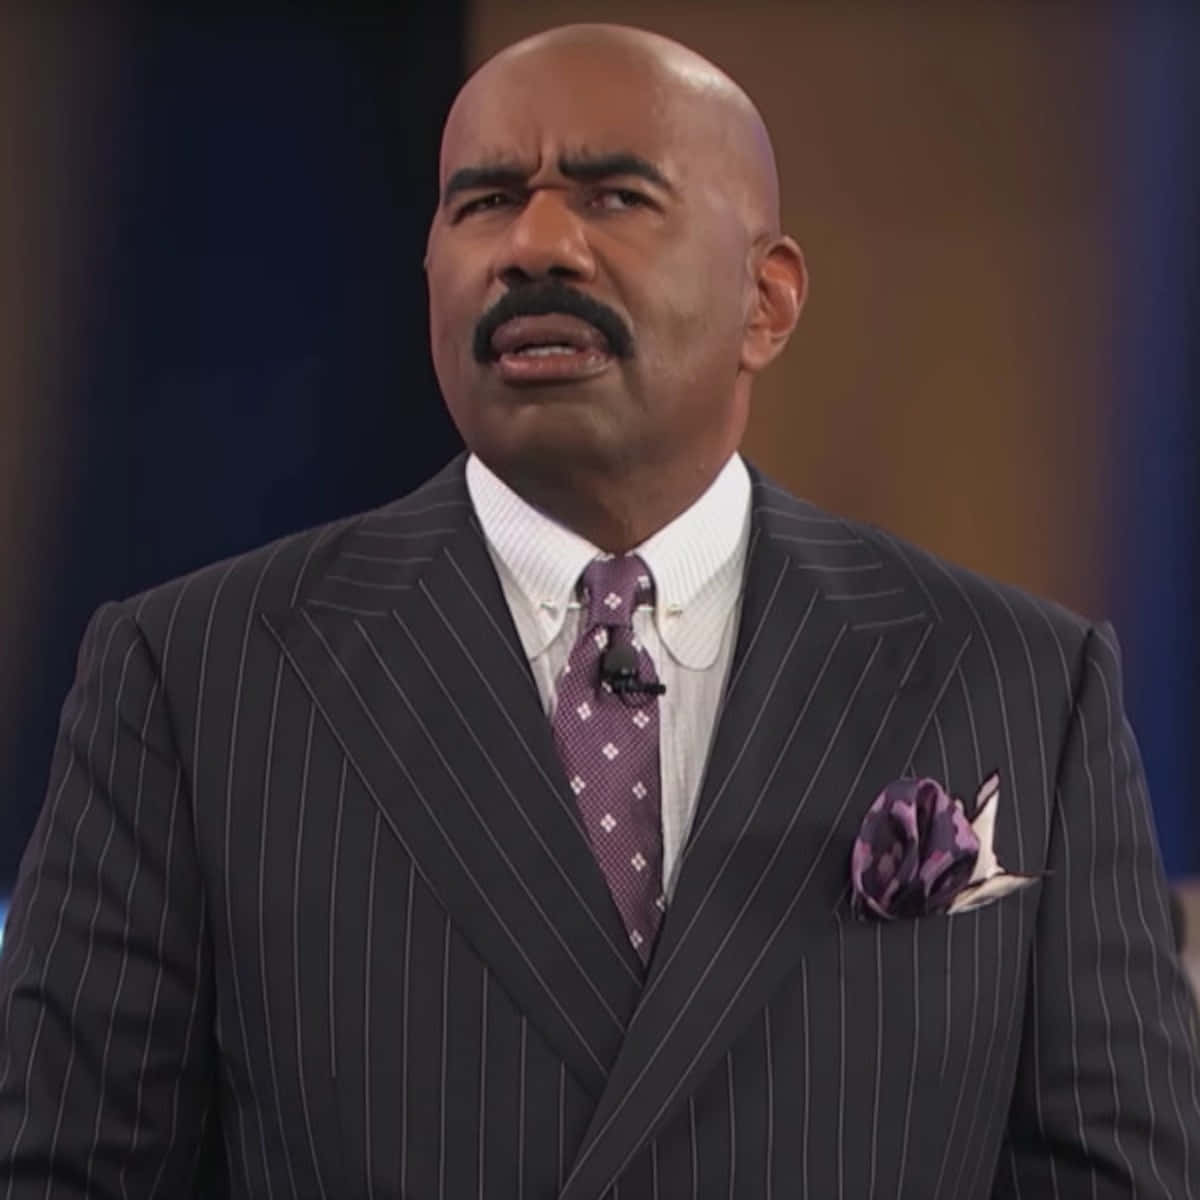 Comedian And Tv Host Steve Harvey With A Surprised Expression.